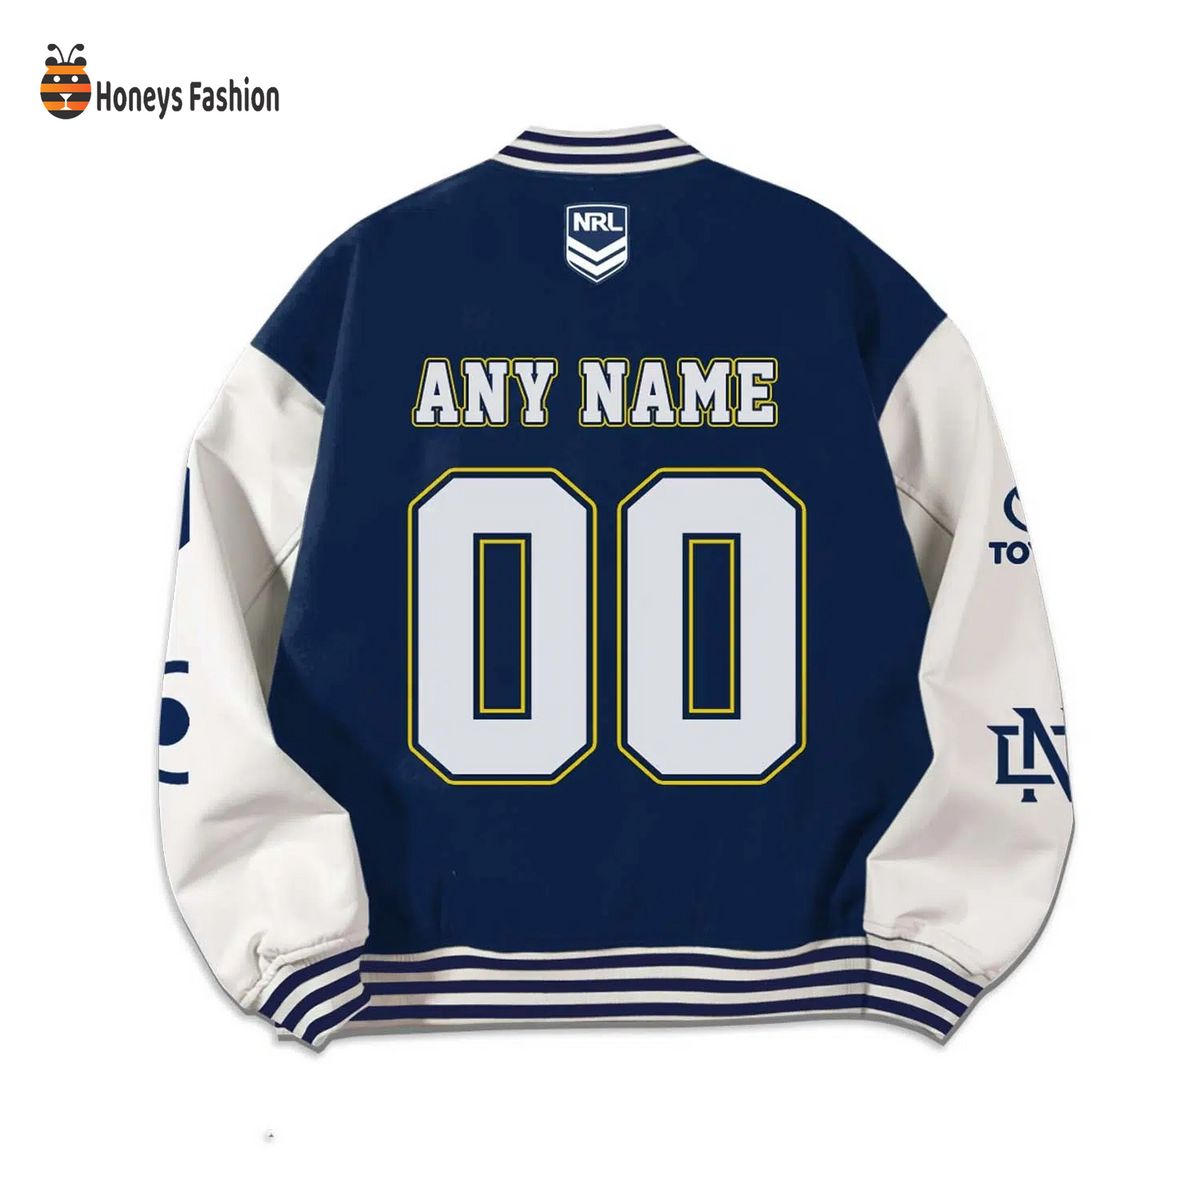 NQ Cowboys Rugby Personalized Jacket